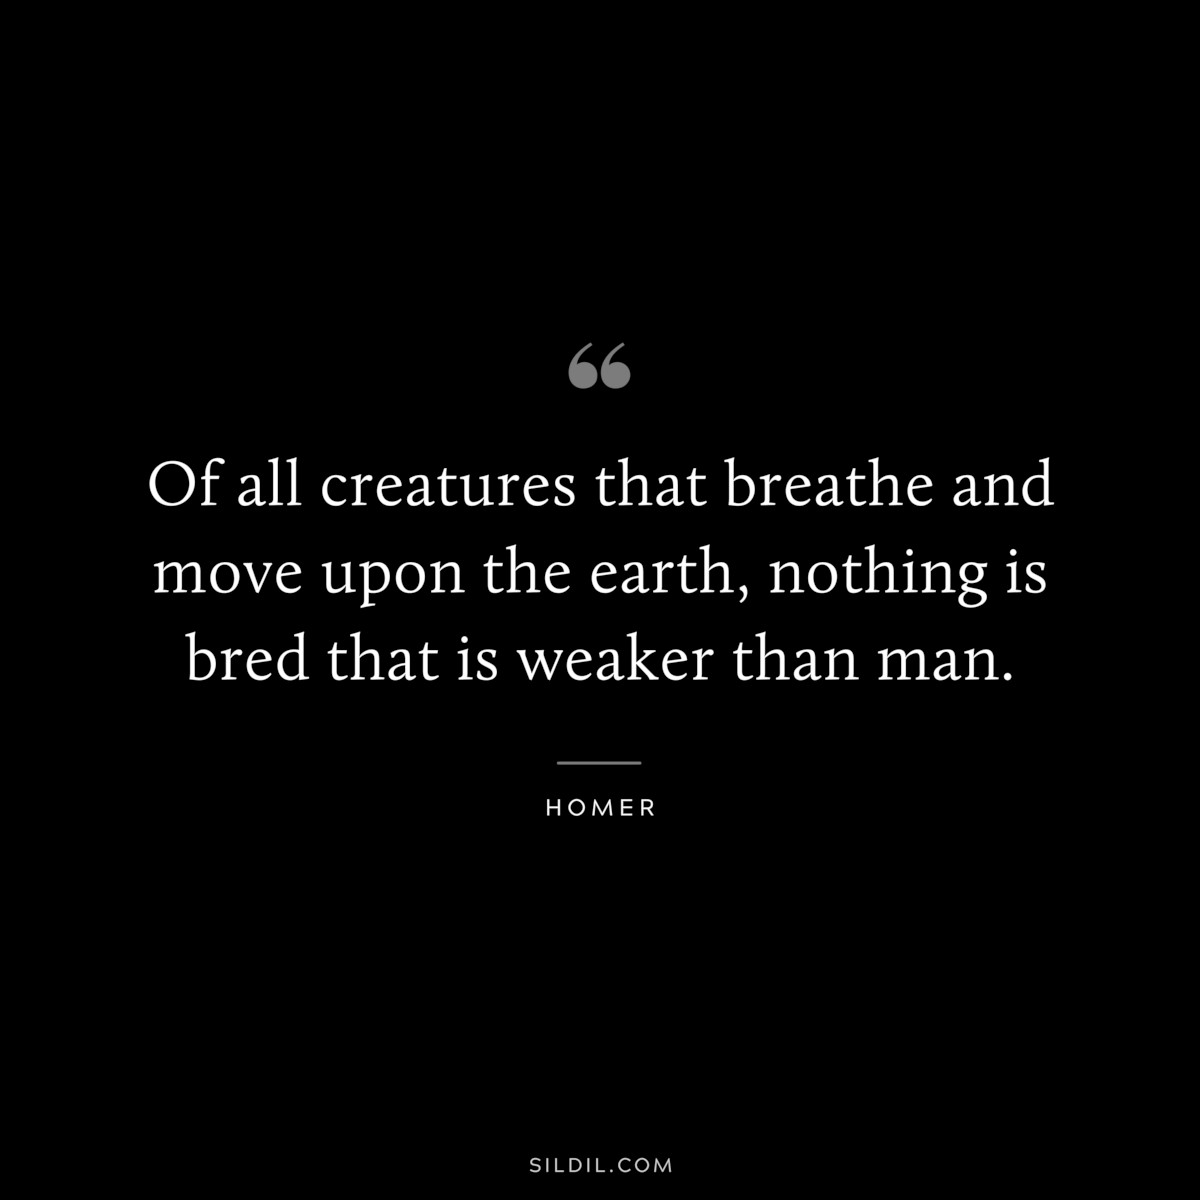 Of all creatures that breathe and move upon the earth, nothing is bred that is weaker than man. ― Homer